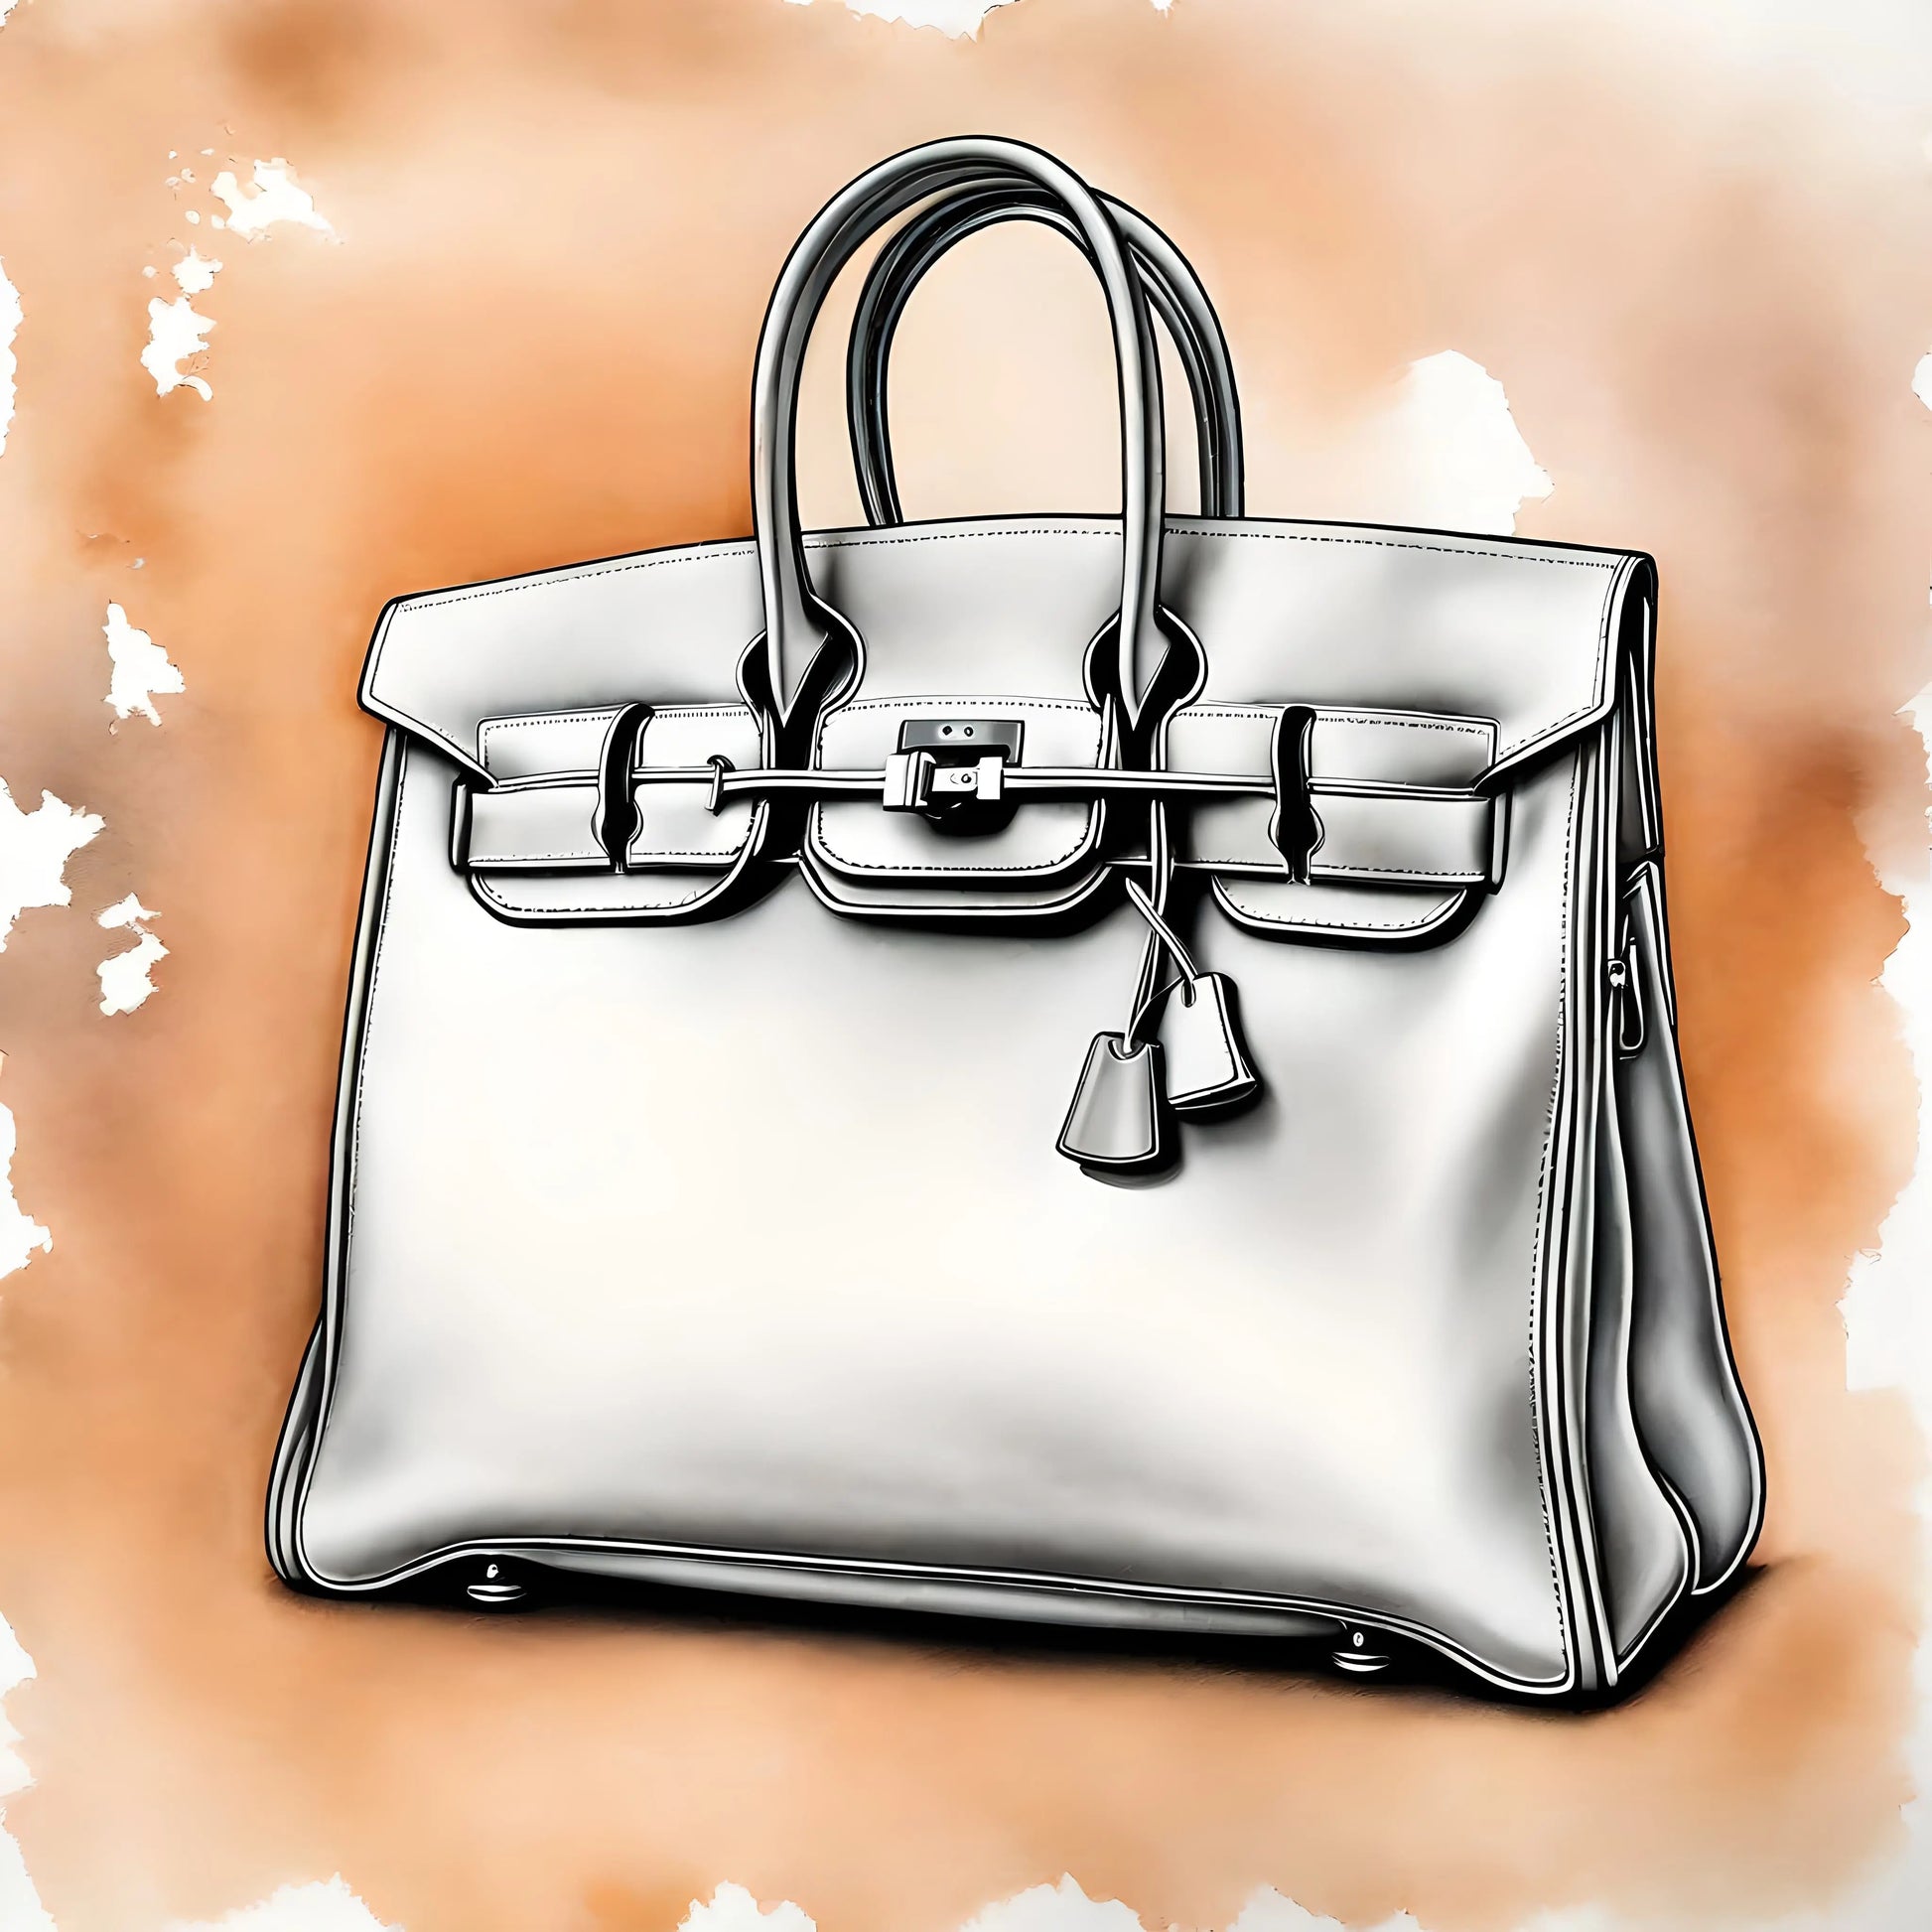 Exquisite Drawing of Hermes Birkin Tote TRY A PROMPT